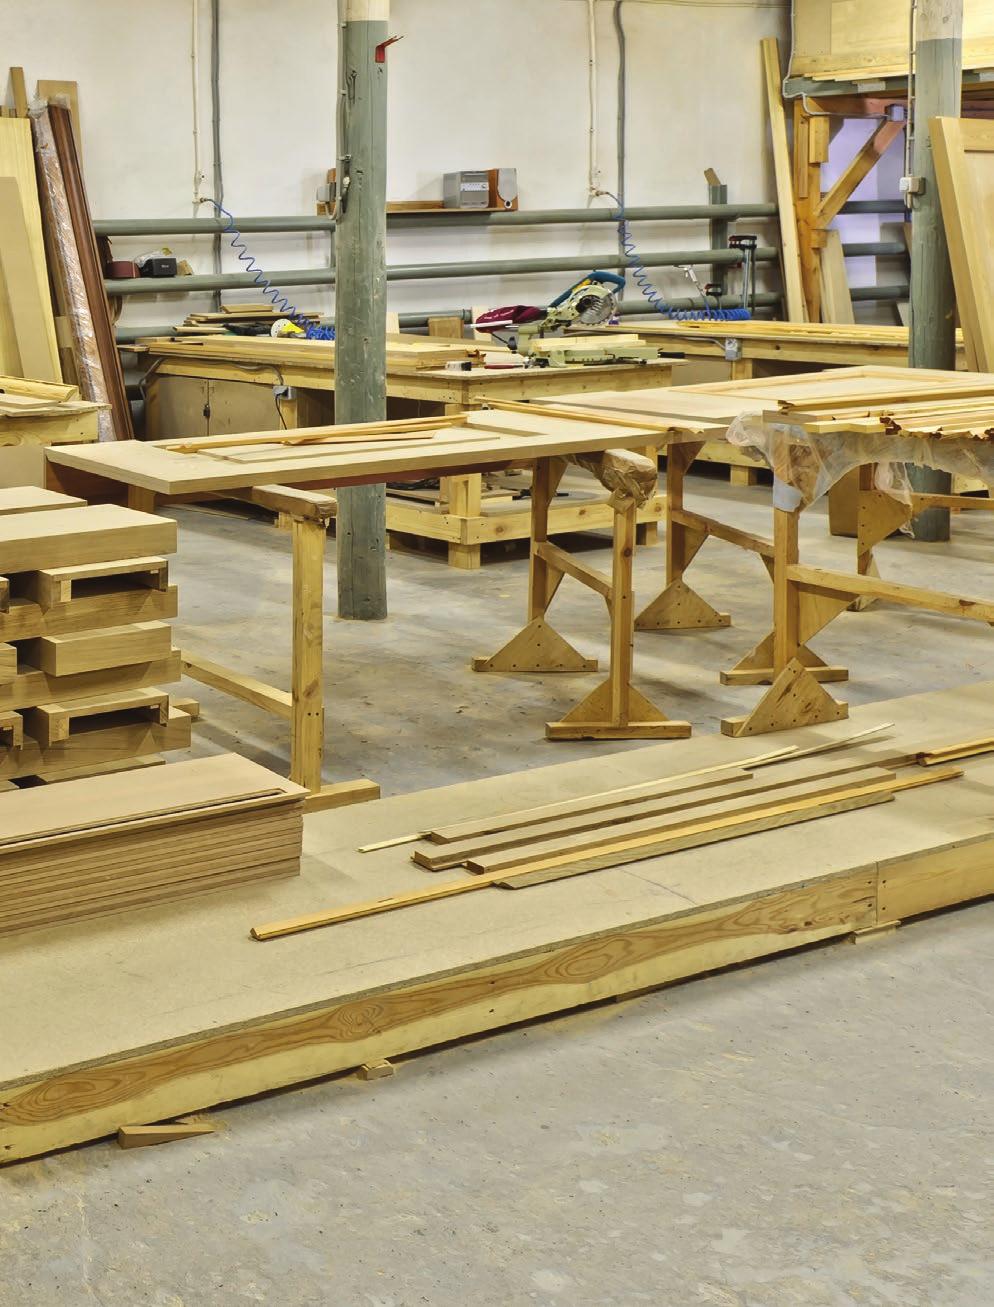 Overview Back to Woodworking Solutions It takes true technical expertise to develop specific and advanced solutions for improving woodworking processes.